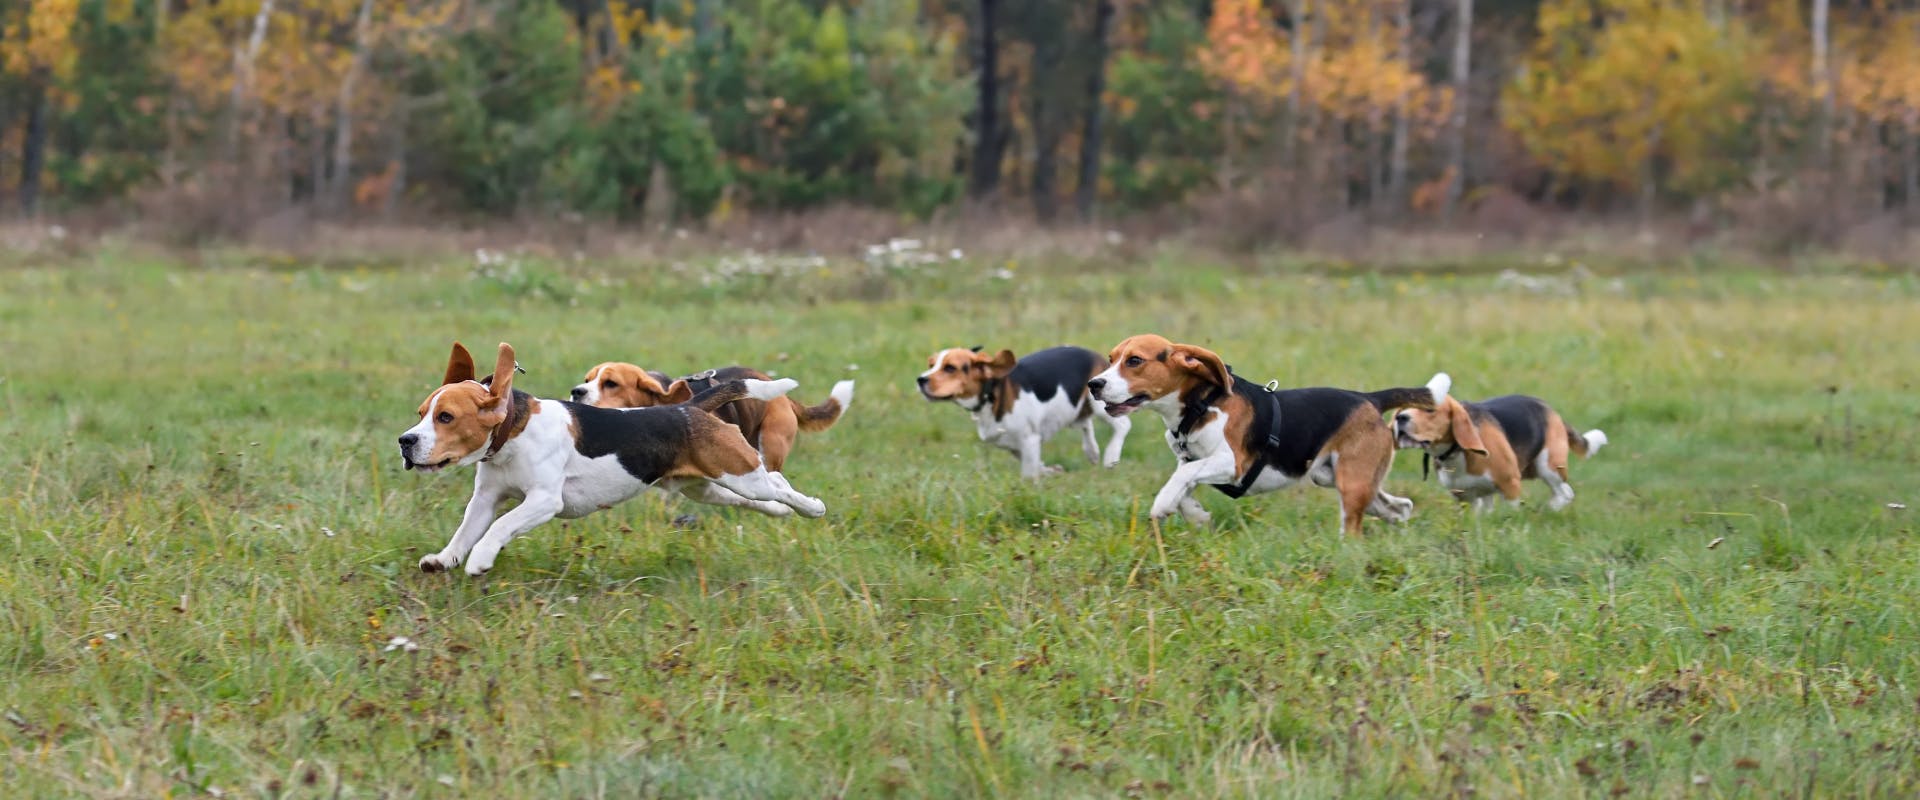 pack of hunting dogs running through a field by a woodland